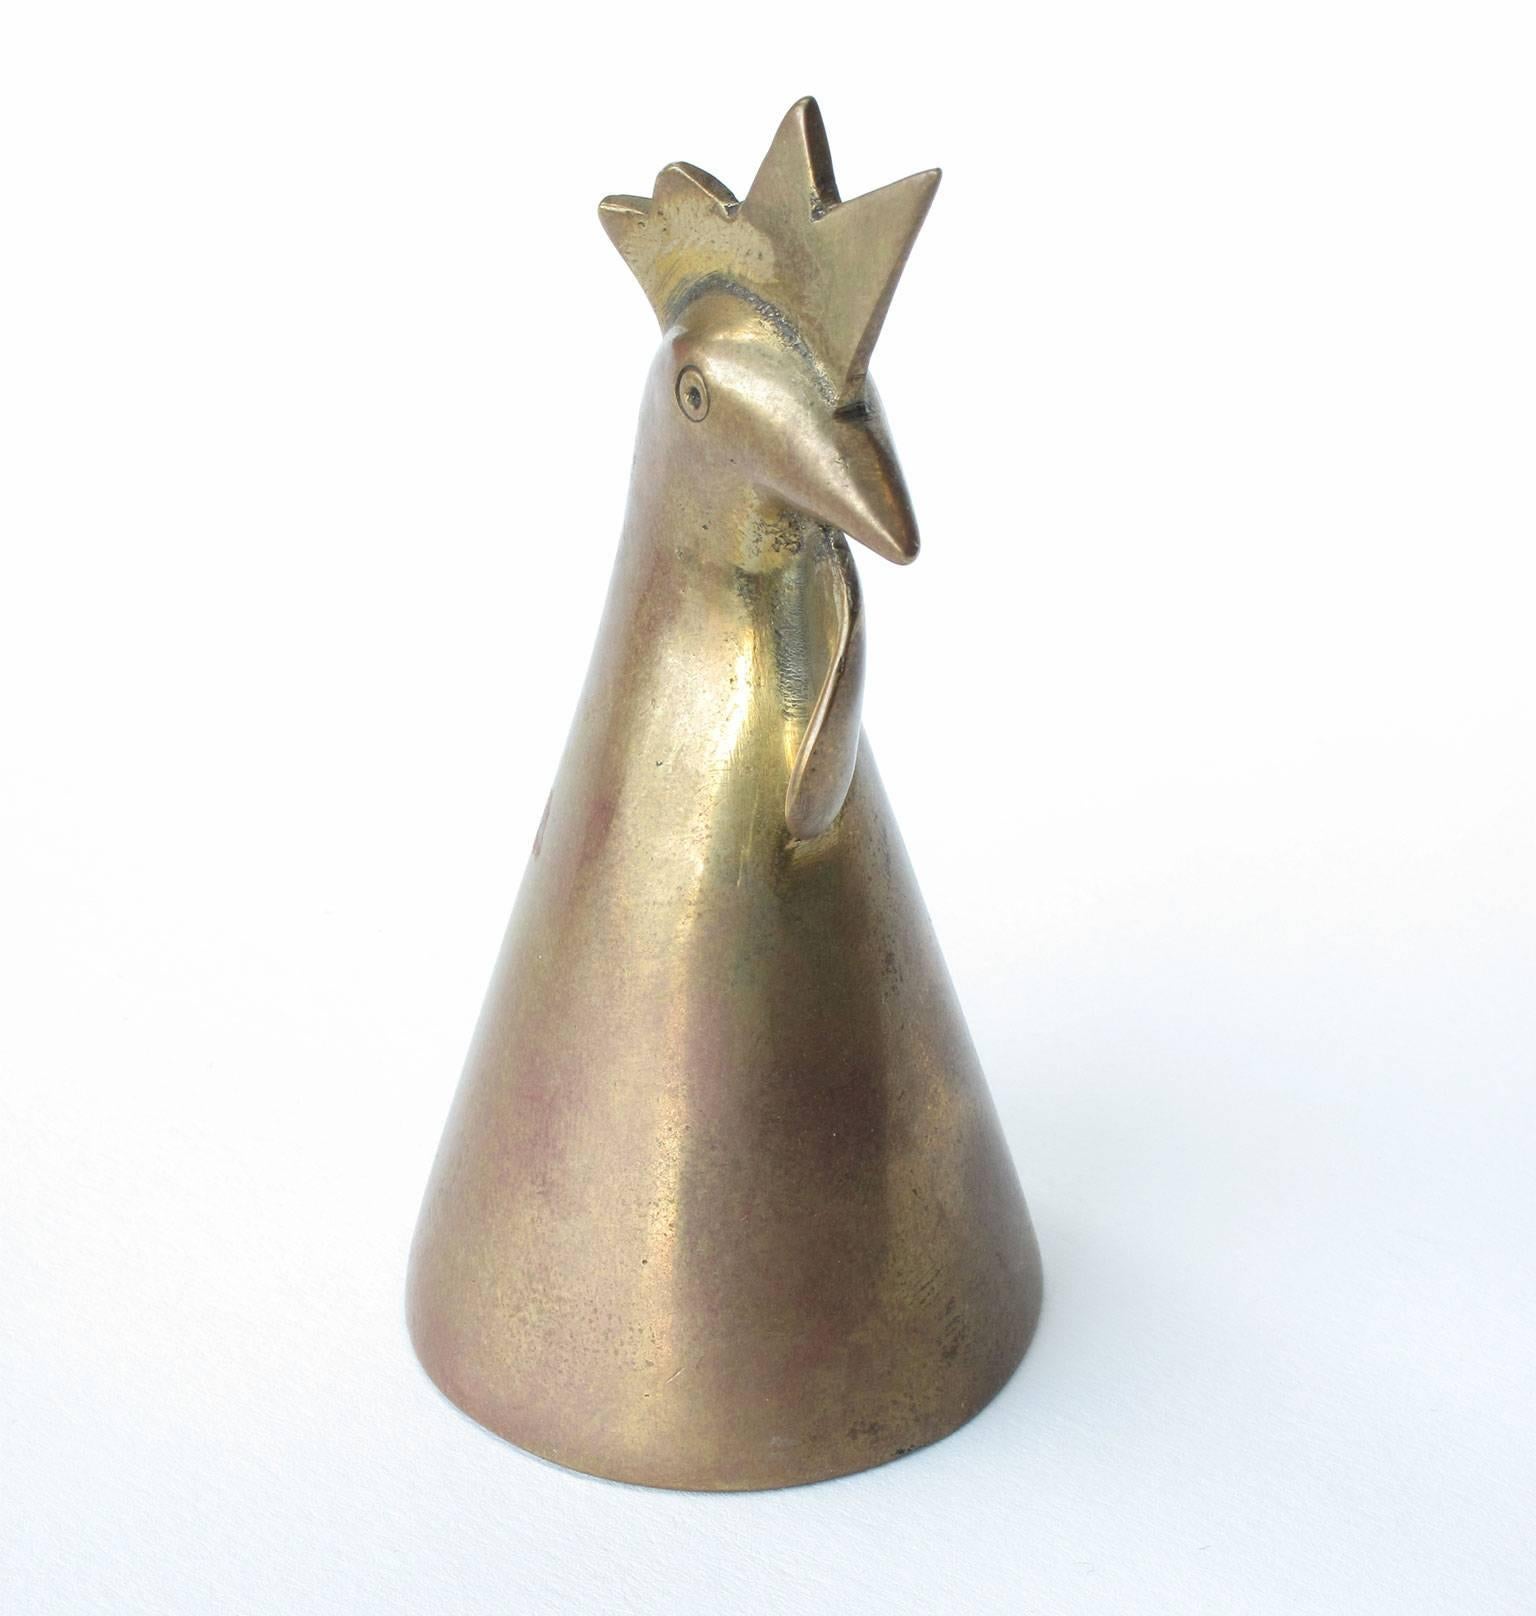 Carl Auböck design object formed in the shape of a rooster, solid brass, signed, Werkstätte Auböck, Austria. Measures: 3 x 1.6 x 1.6 inches.